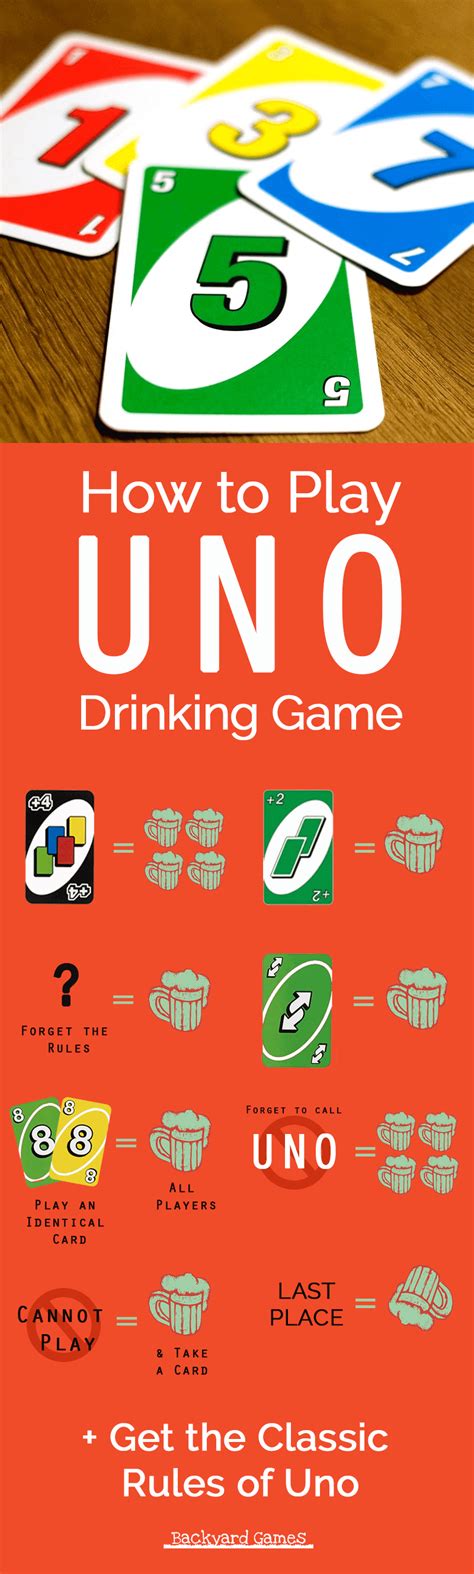 Here’s the rules: +2 card (draw two): You take one shot. +4 card (draw four): You take two shots. Skip card: The skipped player takes one shot. Reverse card: The reversed player takes two shots. False UNO: Take three shots. Winner rule: the winner chooses another player to take three shots. 2. Beer Edition. 